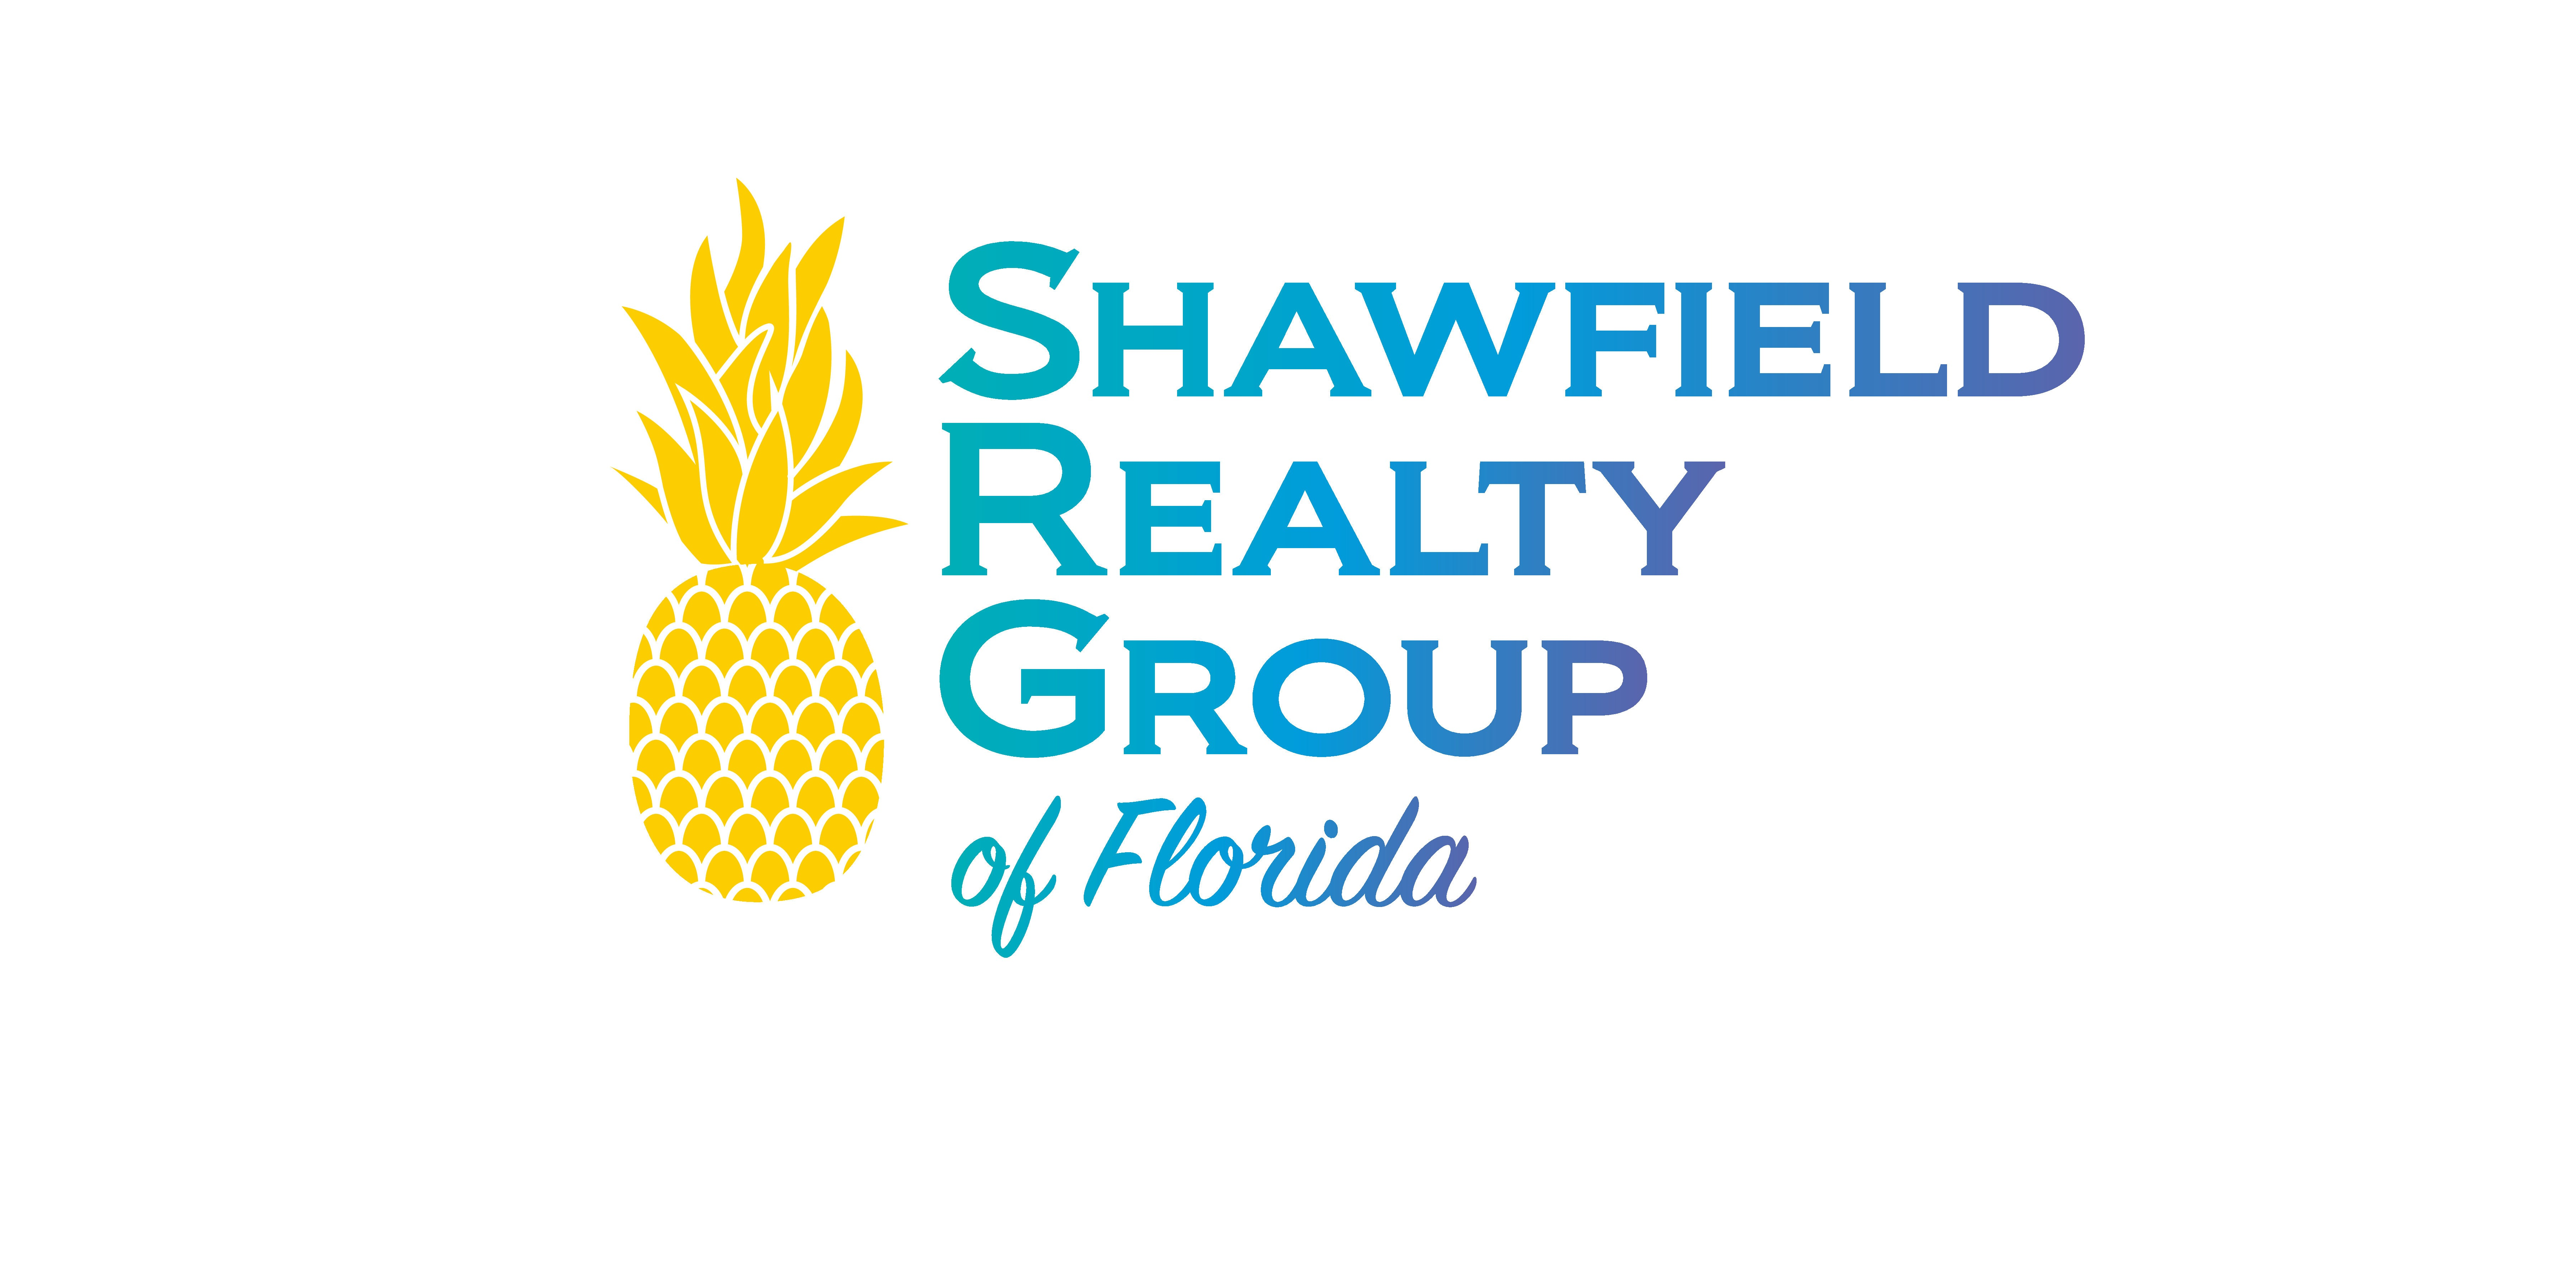 Shawfield Realty Group